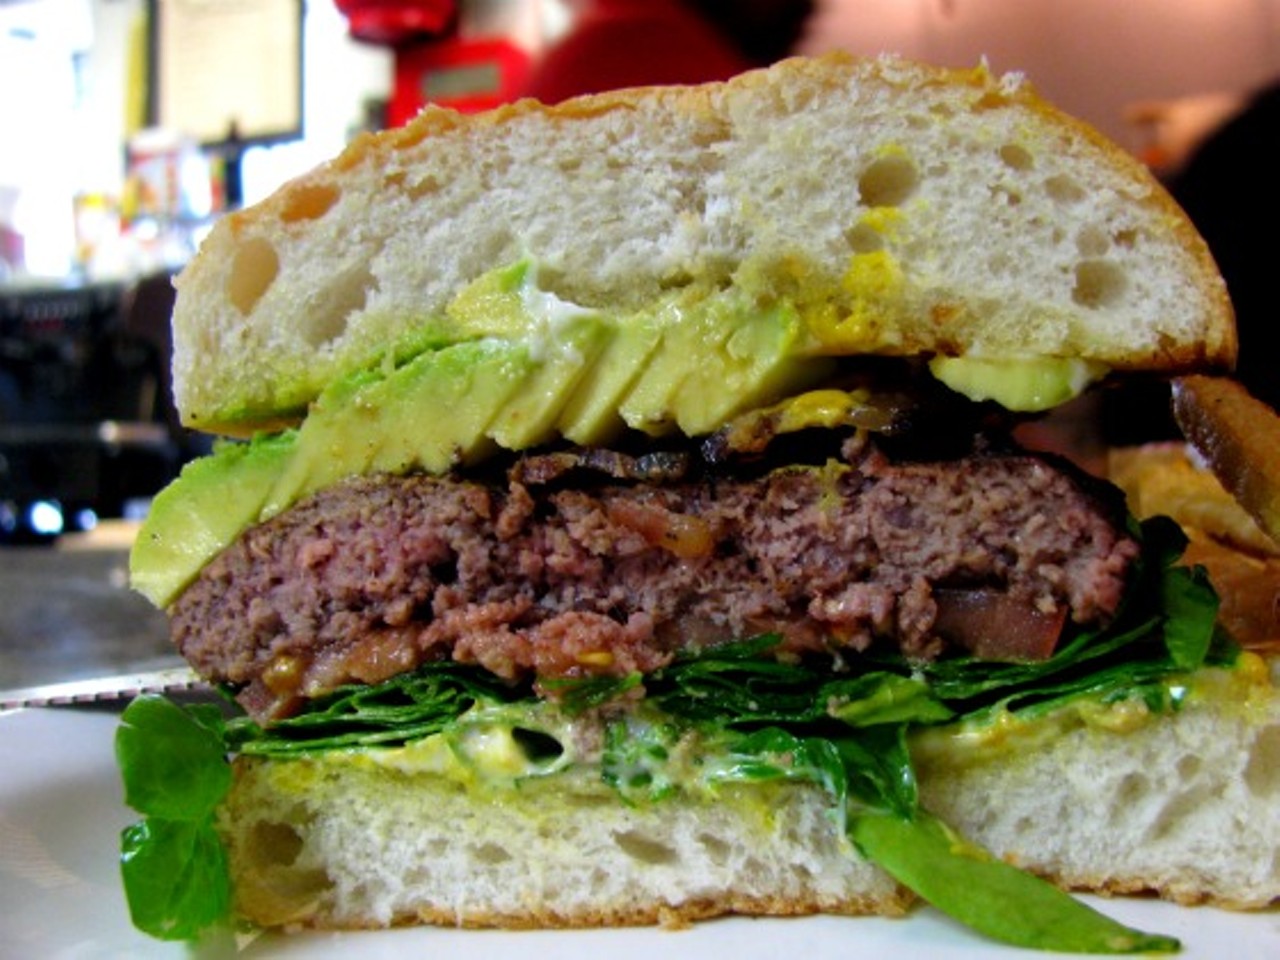 Source: Houston
Where: Facundo 
At Facundo, an unlikely restaurant tucked into a car wash serves a mean burger at lunch, topped with applewood bacon and avocado. credit: 
Read more on Houston Press: Burger and Oil Change at Facundo Cafe